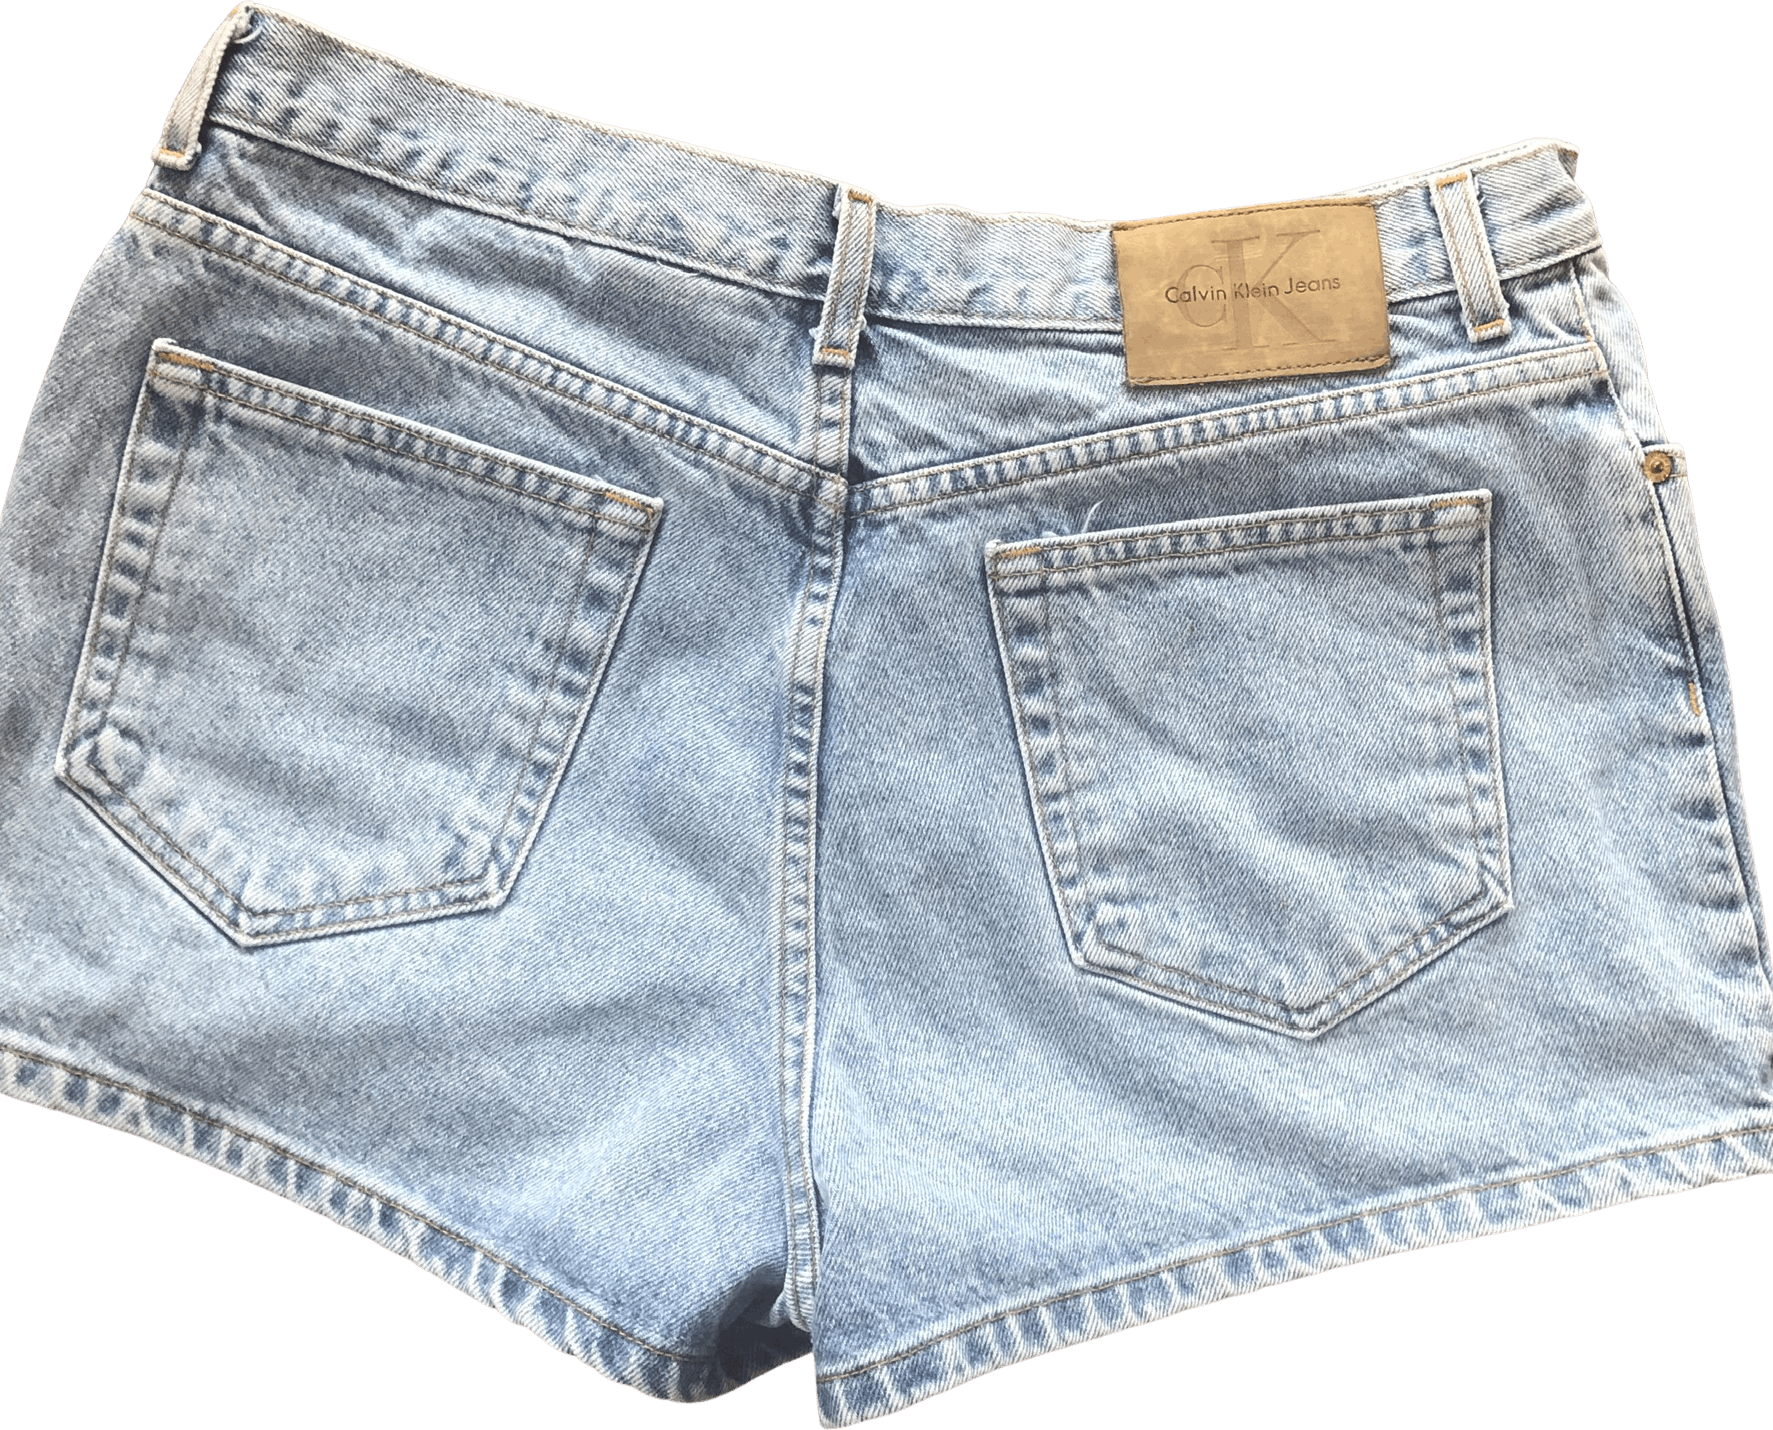 Vintage 90 S High Waisted Light Wash Mom Jeans Shorts By Calvin Klein Free Shipping Thrilling